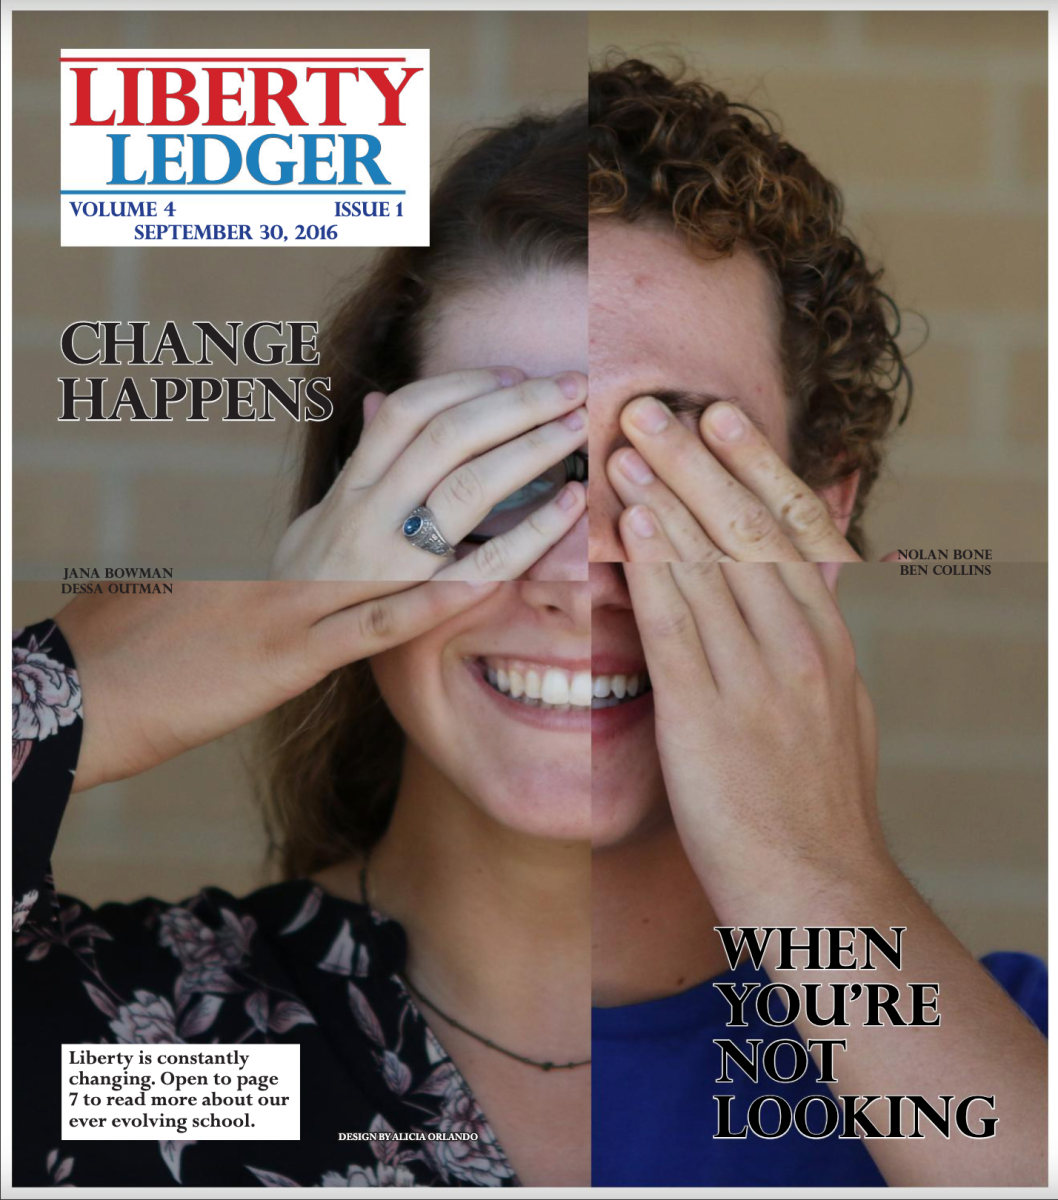 The Ledger Volume 4 Issue 1: Change Happens When Youre Not Looking